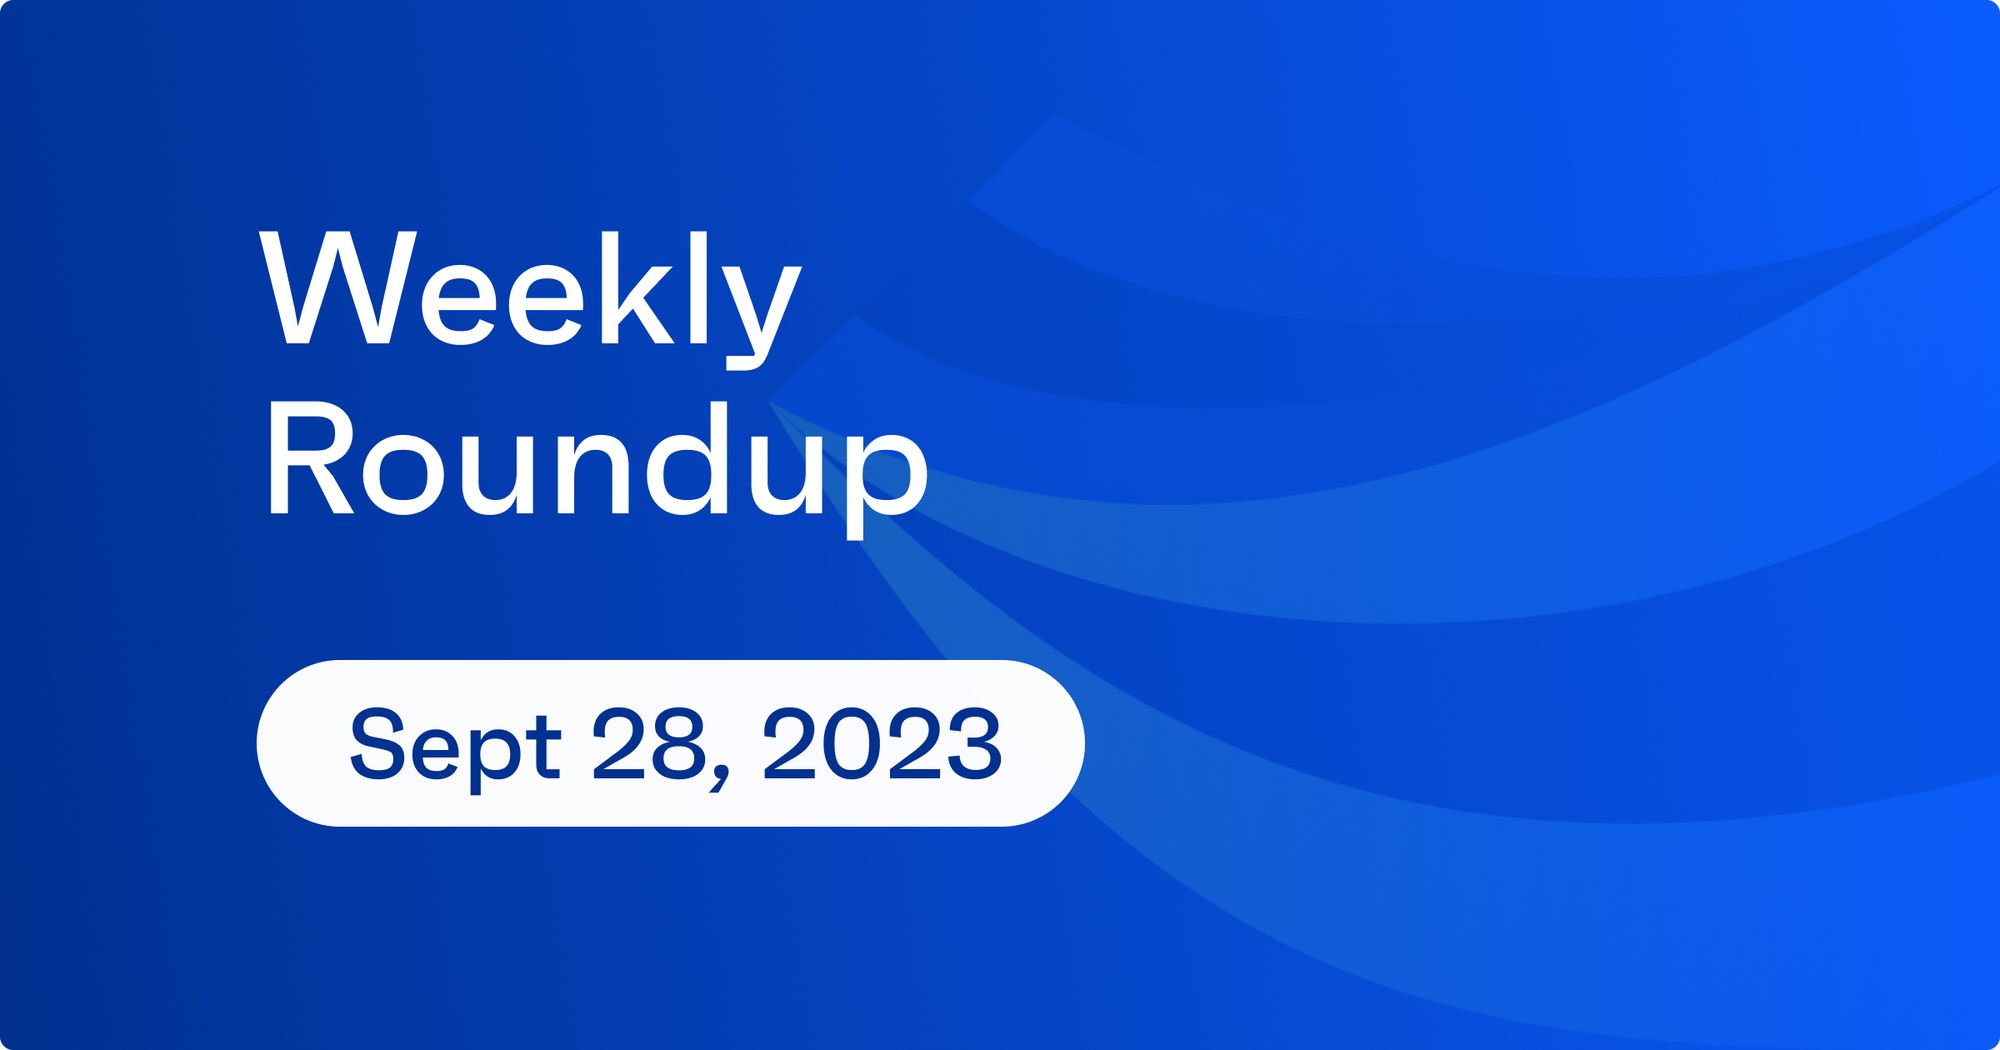 Weekly Roundup 9/28 - We take a closer look at Stader ETHx, new ETH assets & pool ratings blog cover image